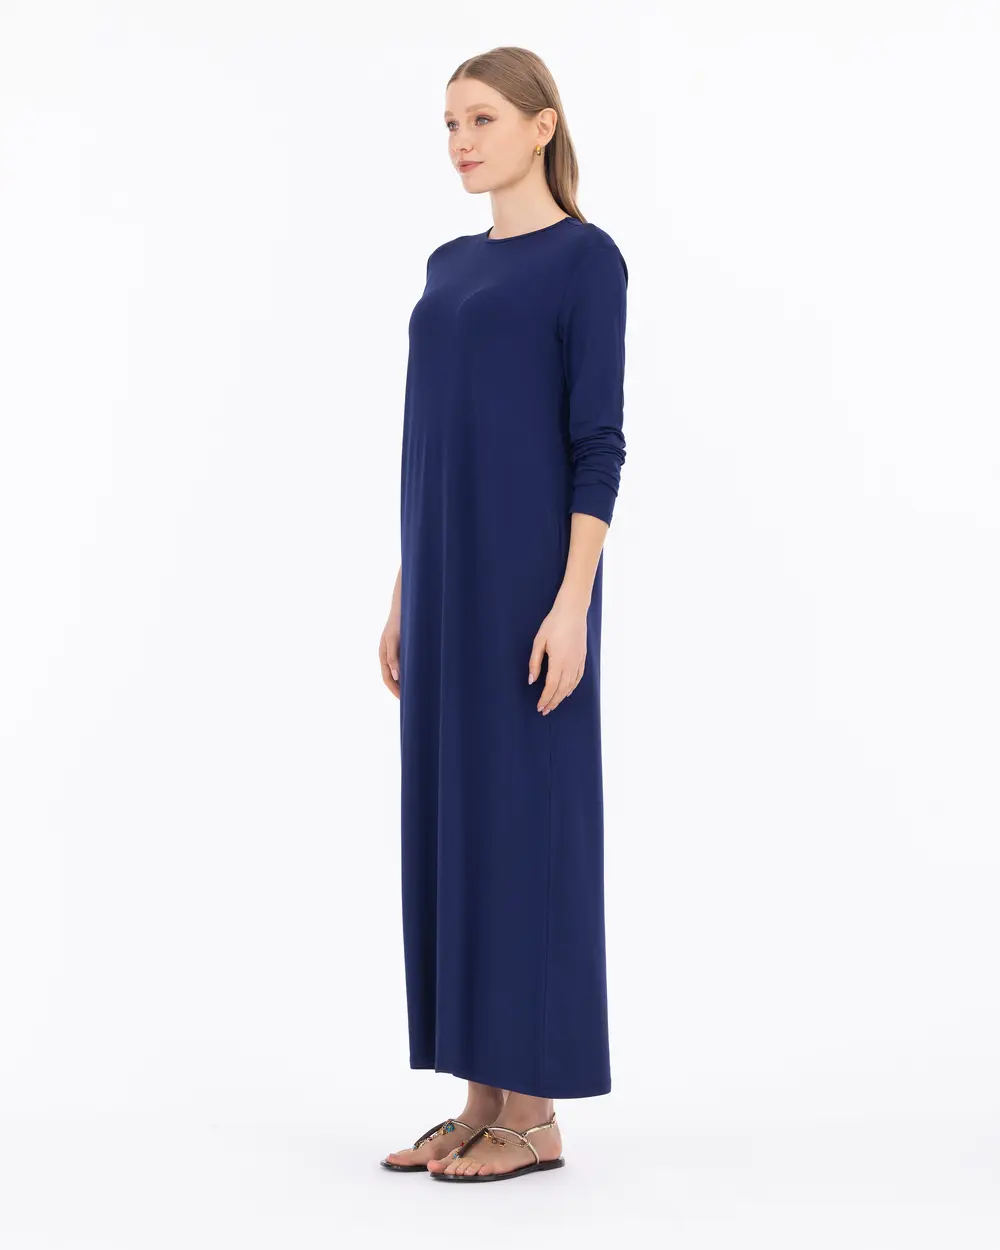 Relaxed Fit Round Neck Full Length Dress